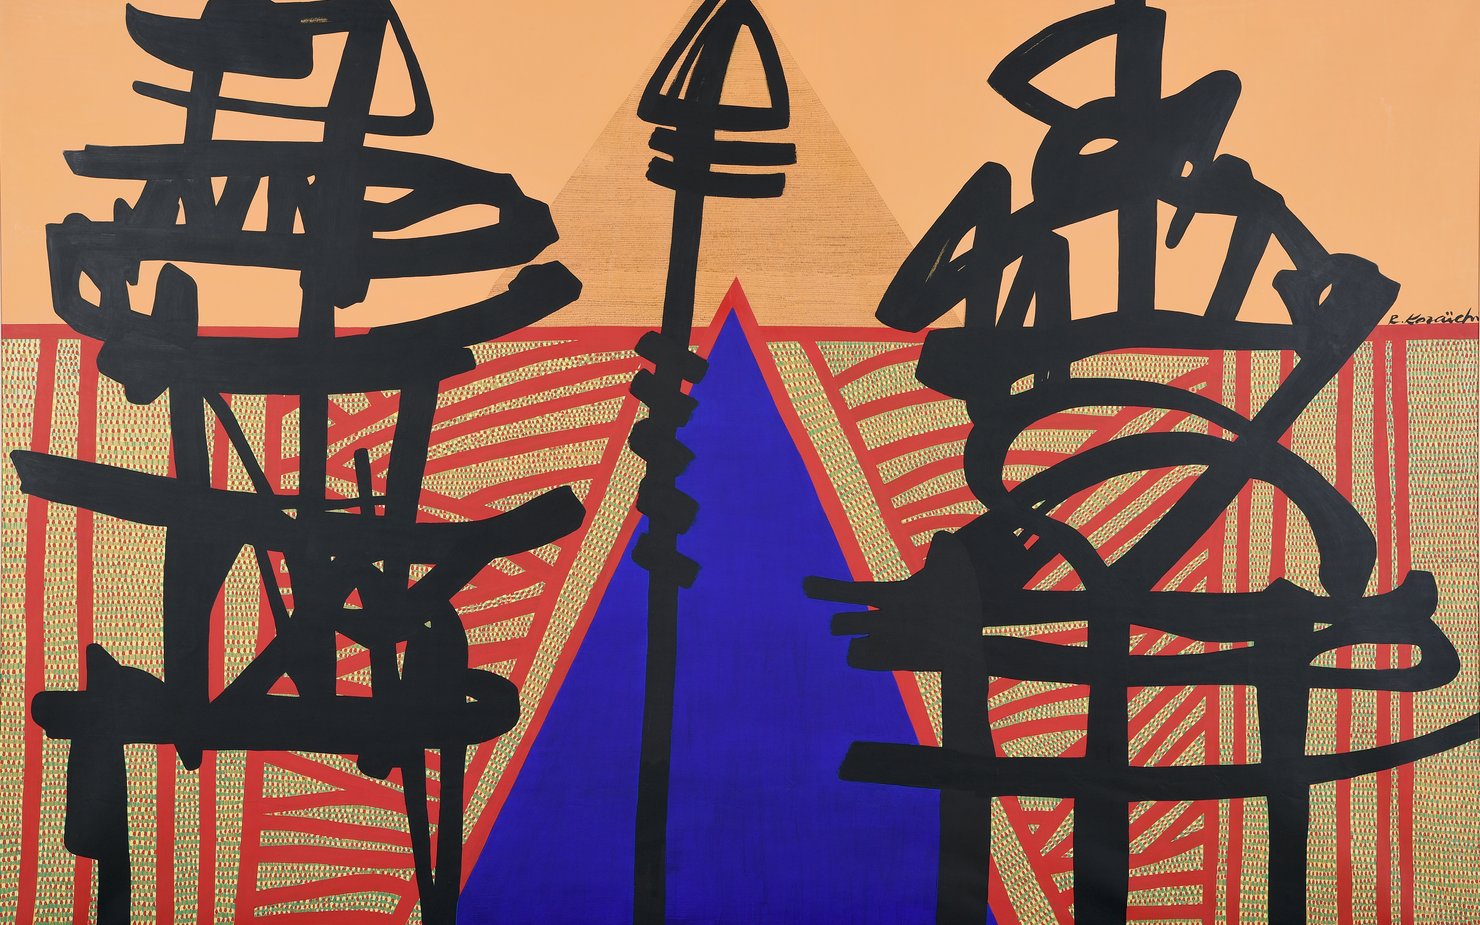 Abstract drawing with a blue triangle in the middle and prominent red and black line drawings on top.